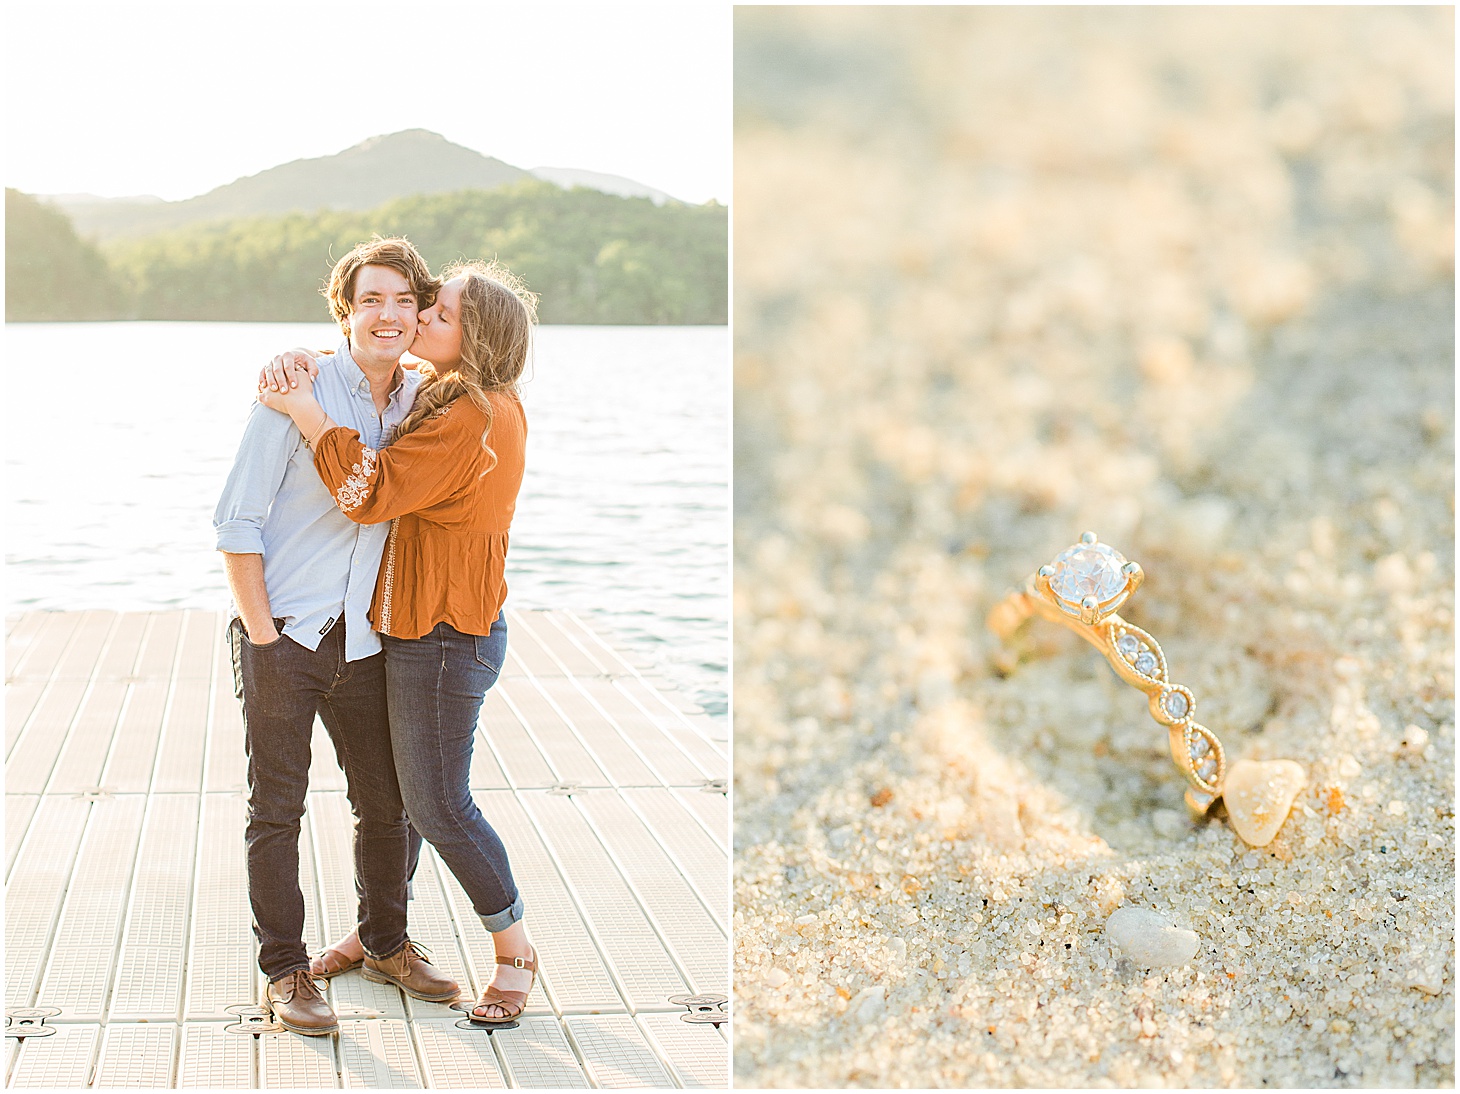 carvinscoveengagementsession_roanokeengagementsession_carvinscove_virginiawedding_virginiaweddingphotographer_vaweddingphotographer_photo_0032.jpg